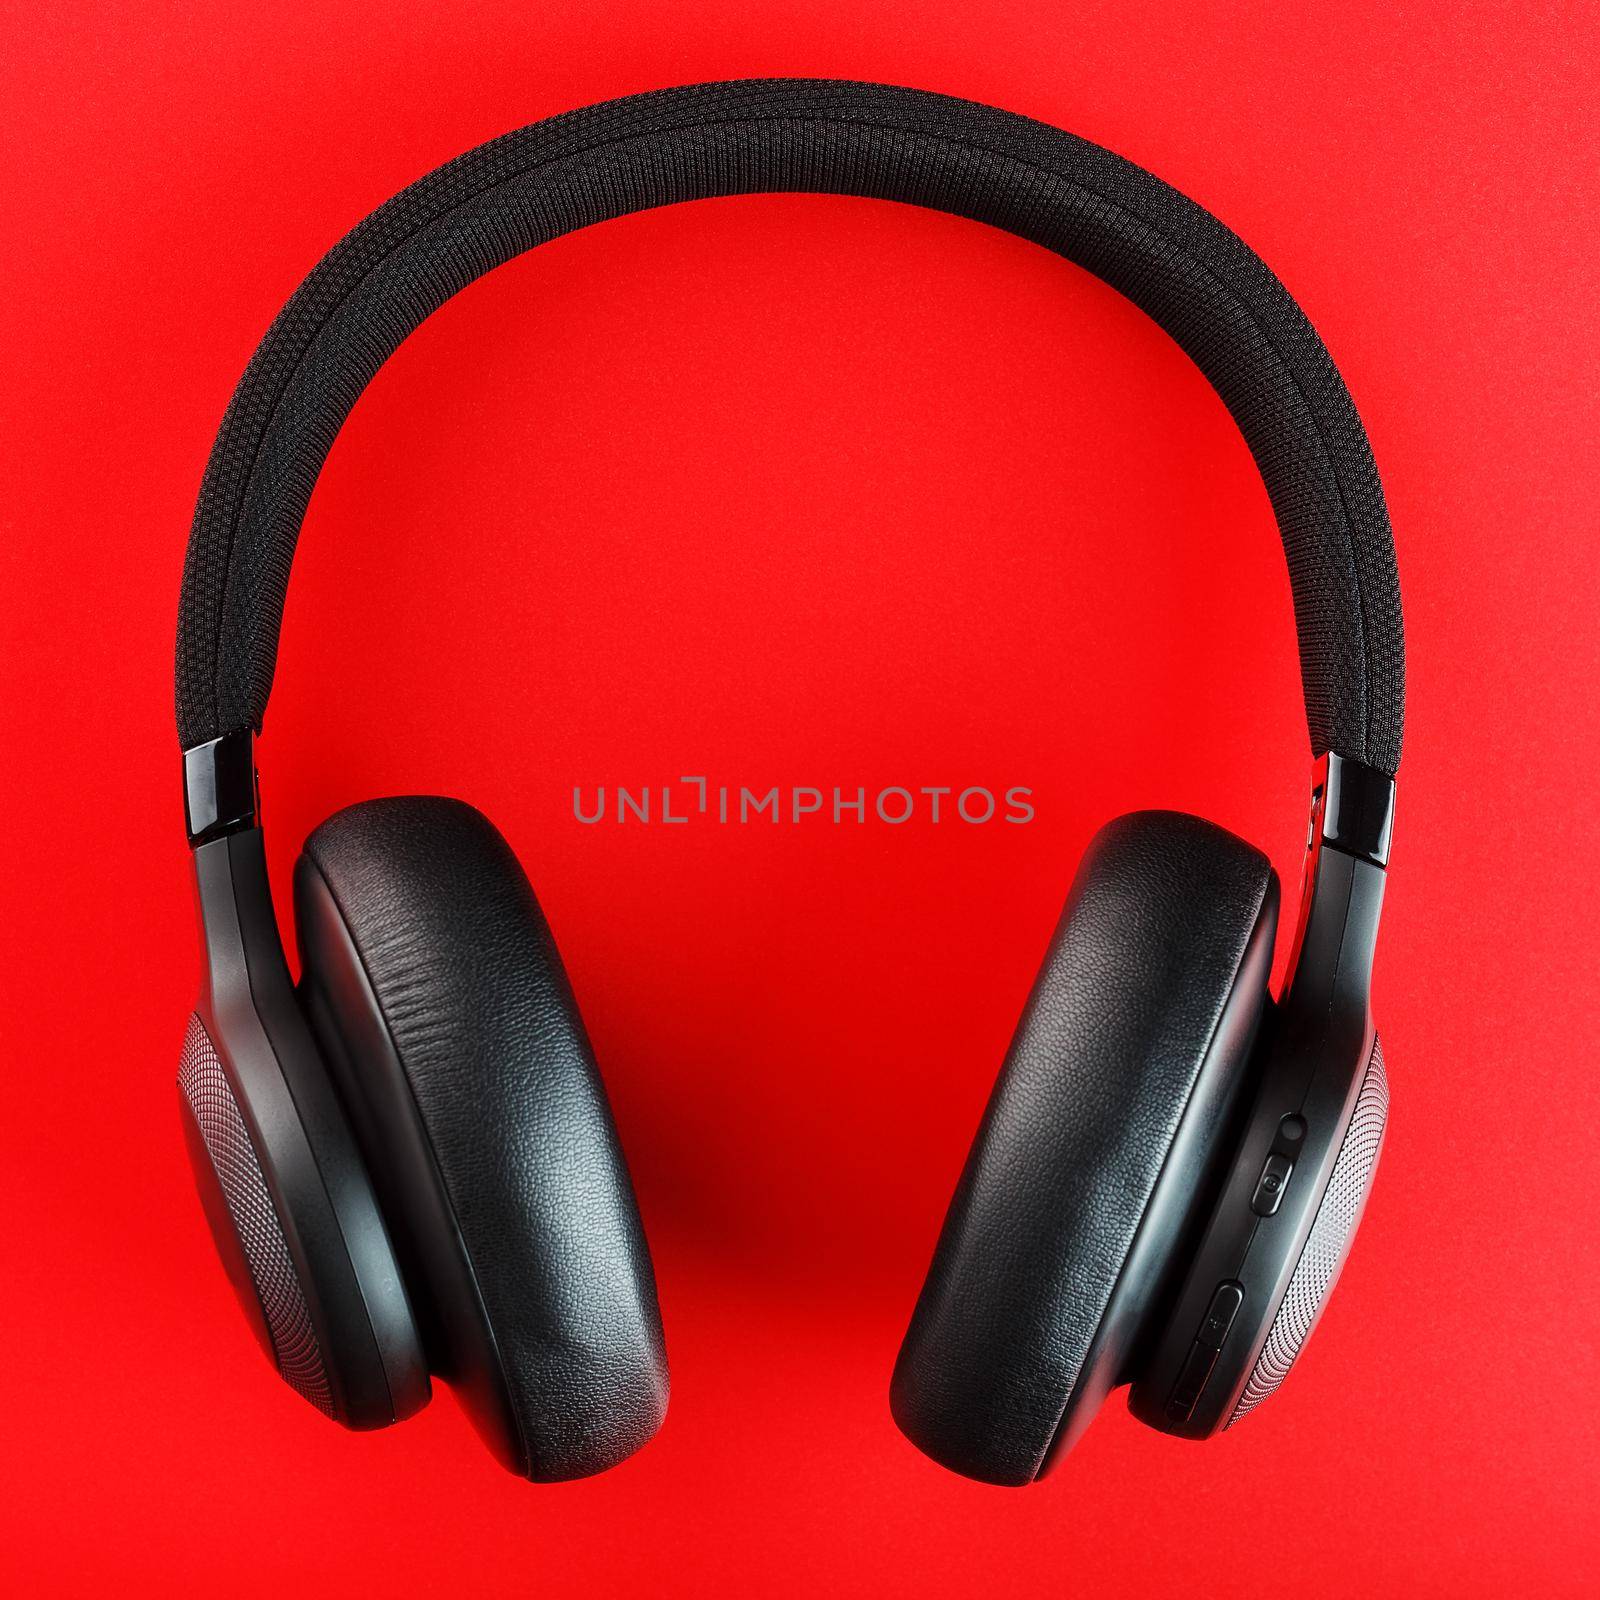 Wireless black headphones on a red background. View from above. In-ear headphones for playing games and listening to music tracks. Modern style